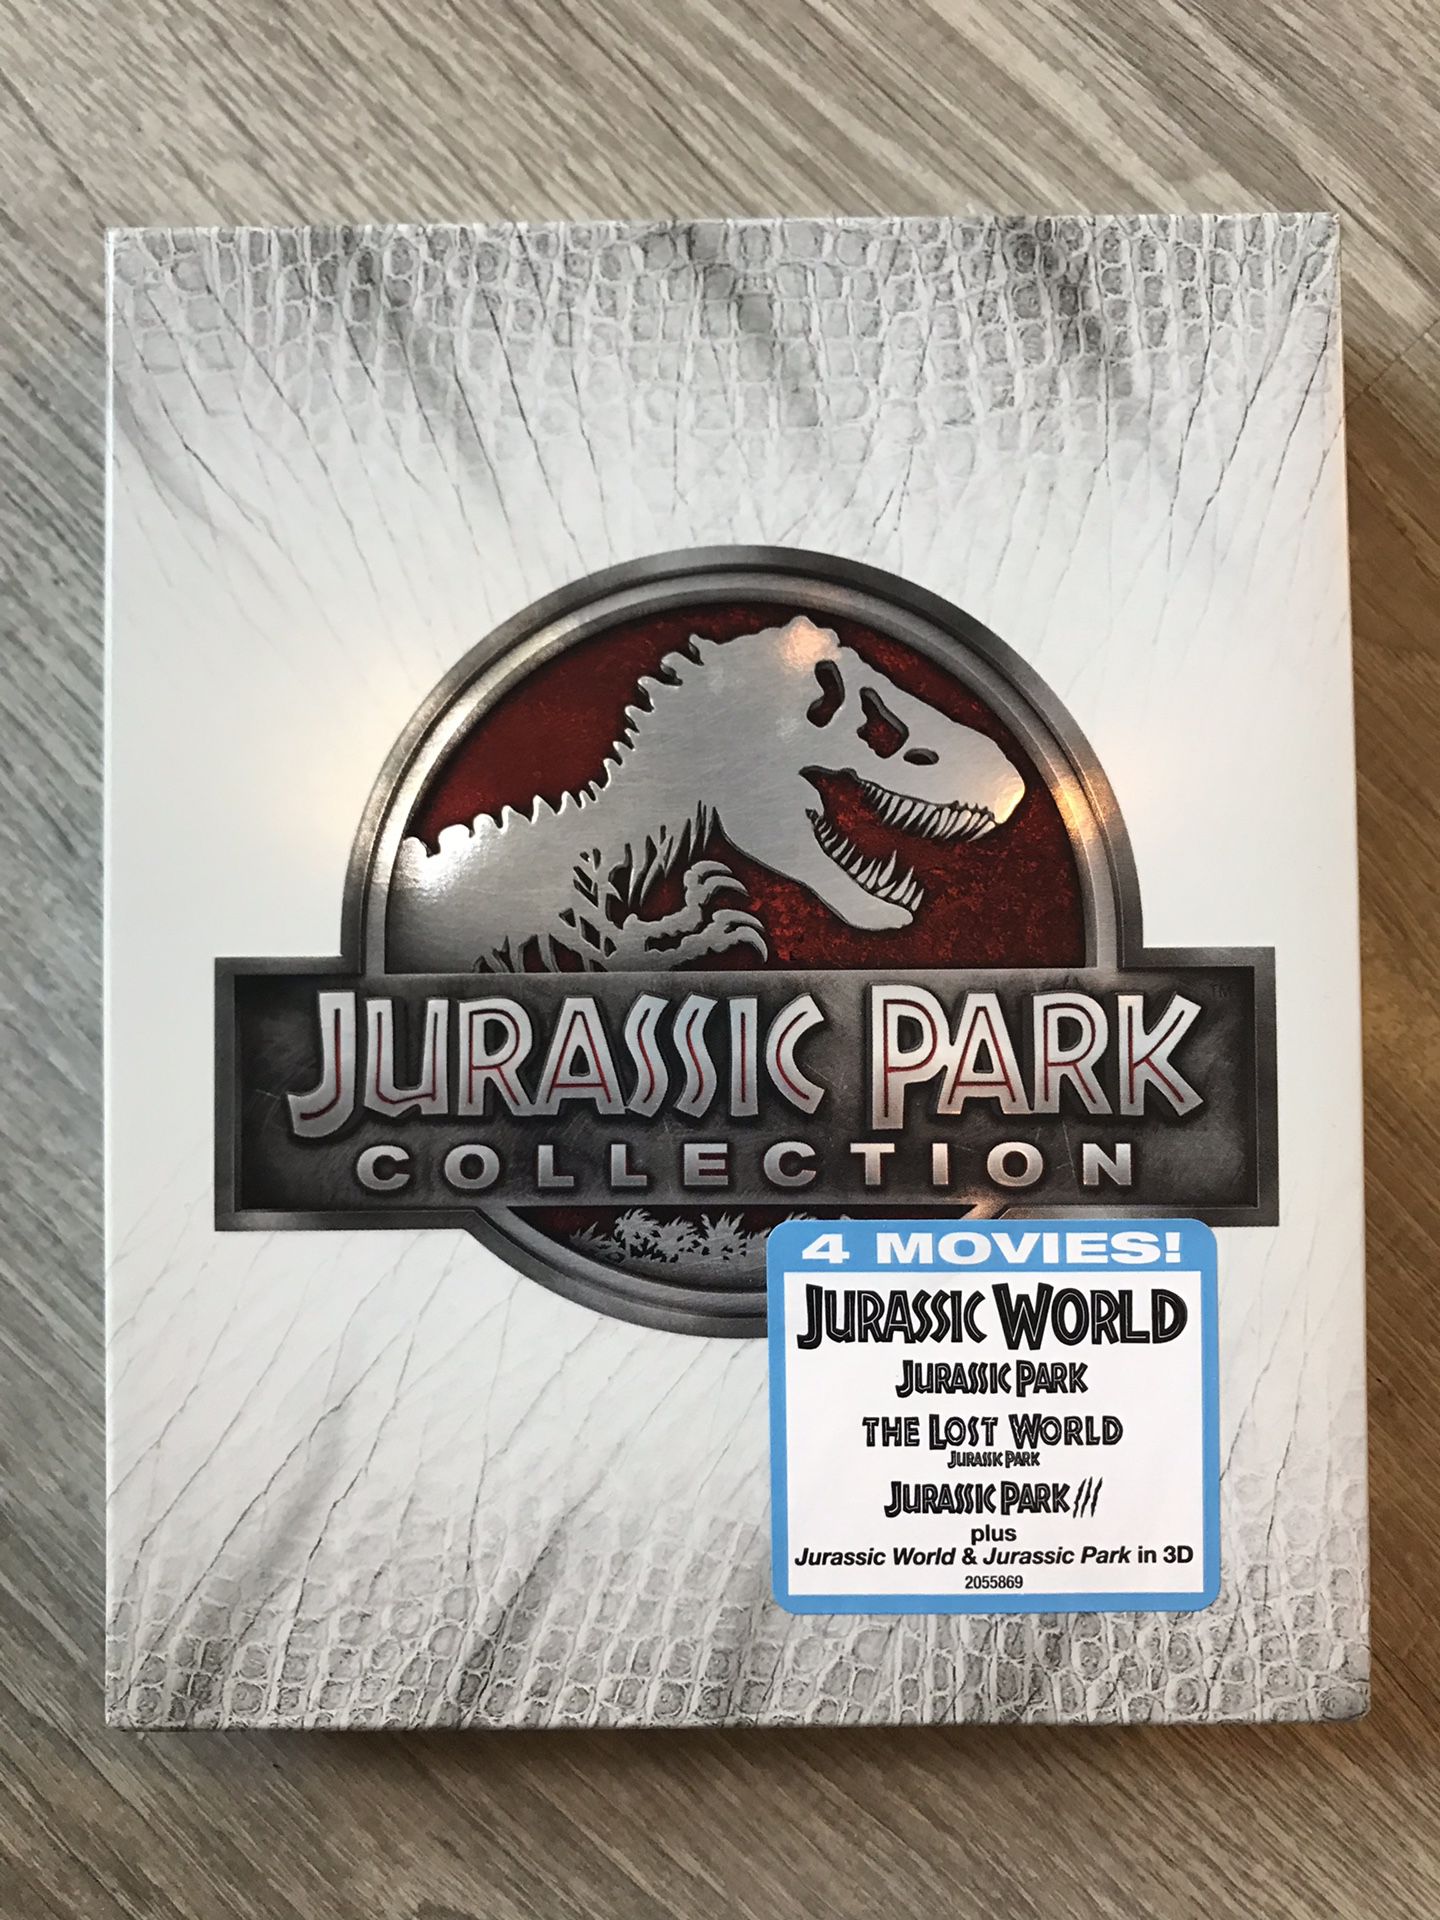 Jurassic Park Collection (includes Jurassic World) Blu Ray